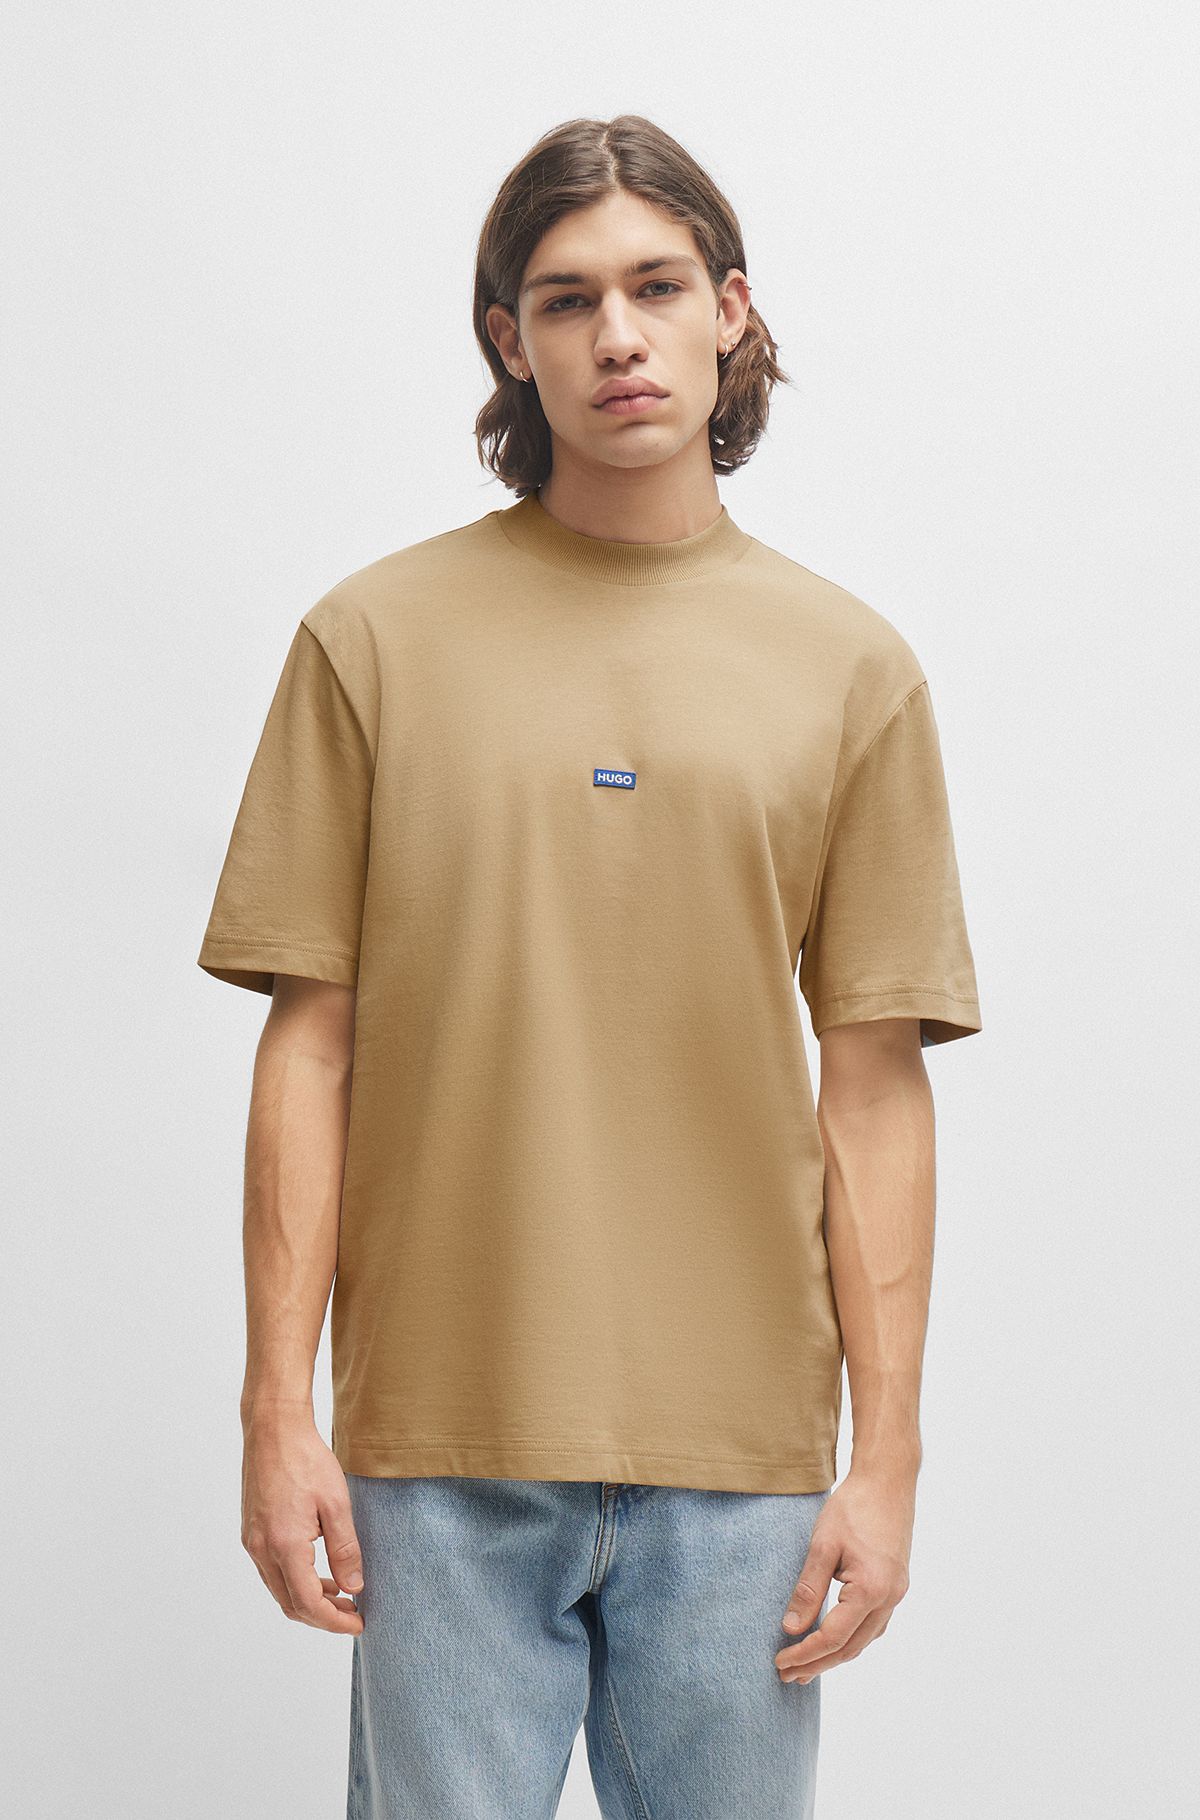 Cotton-jersey T-shirt with blue logo patch, Beige